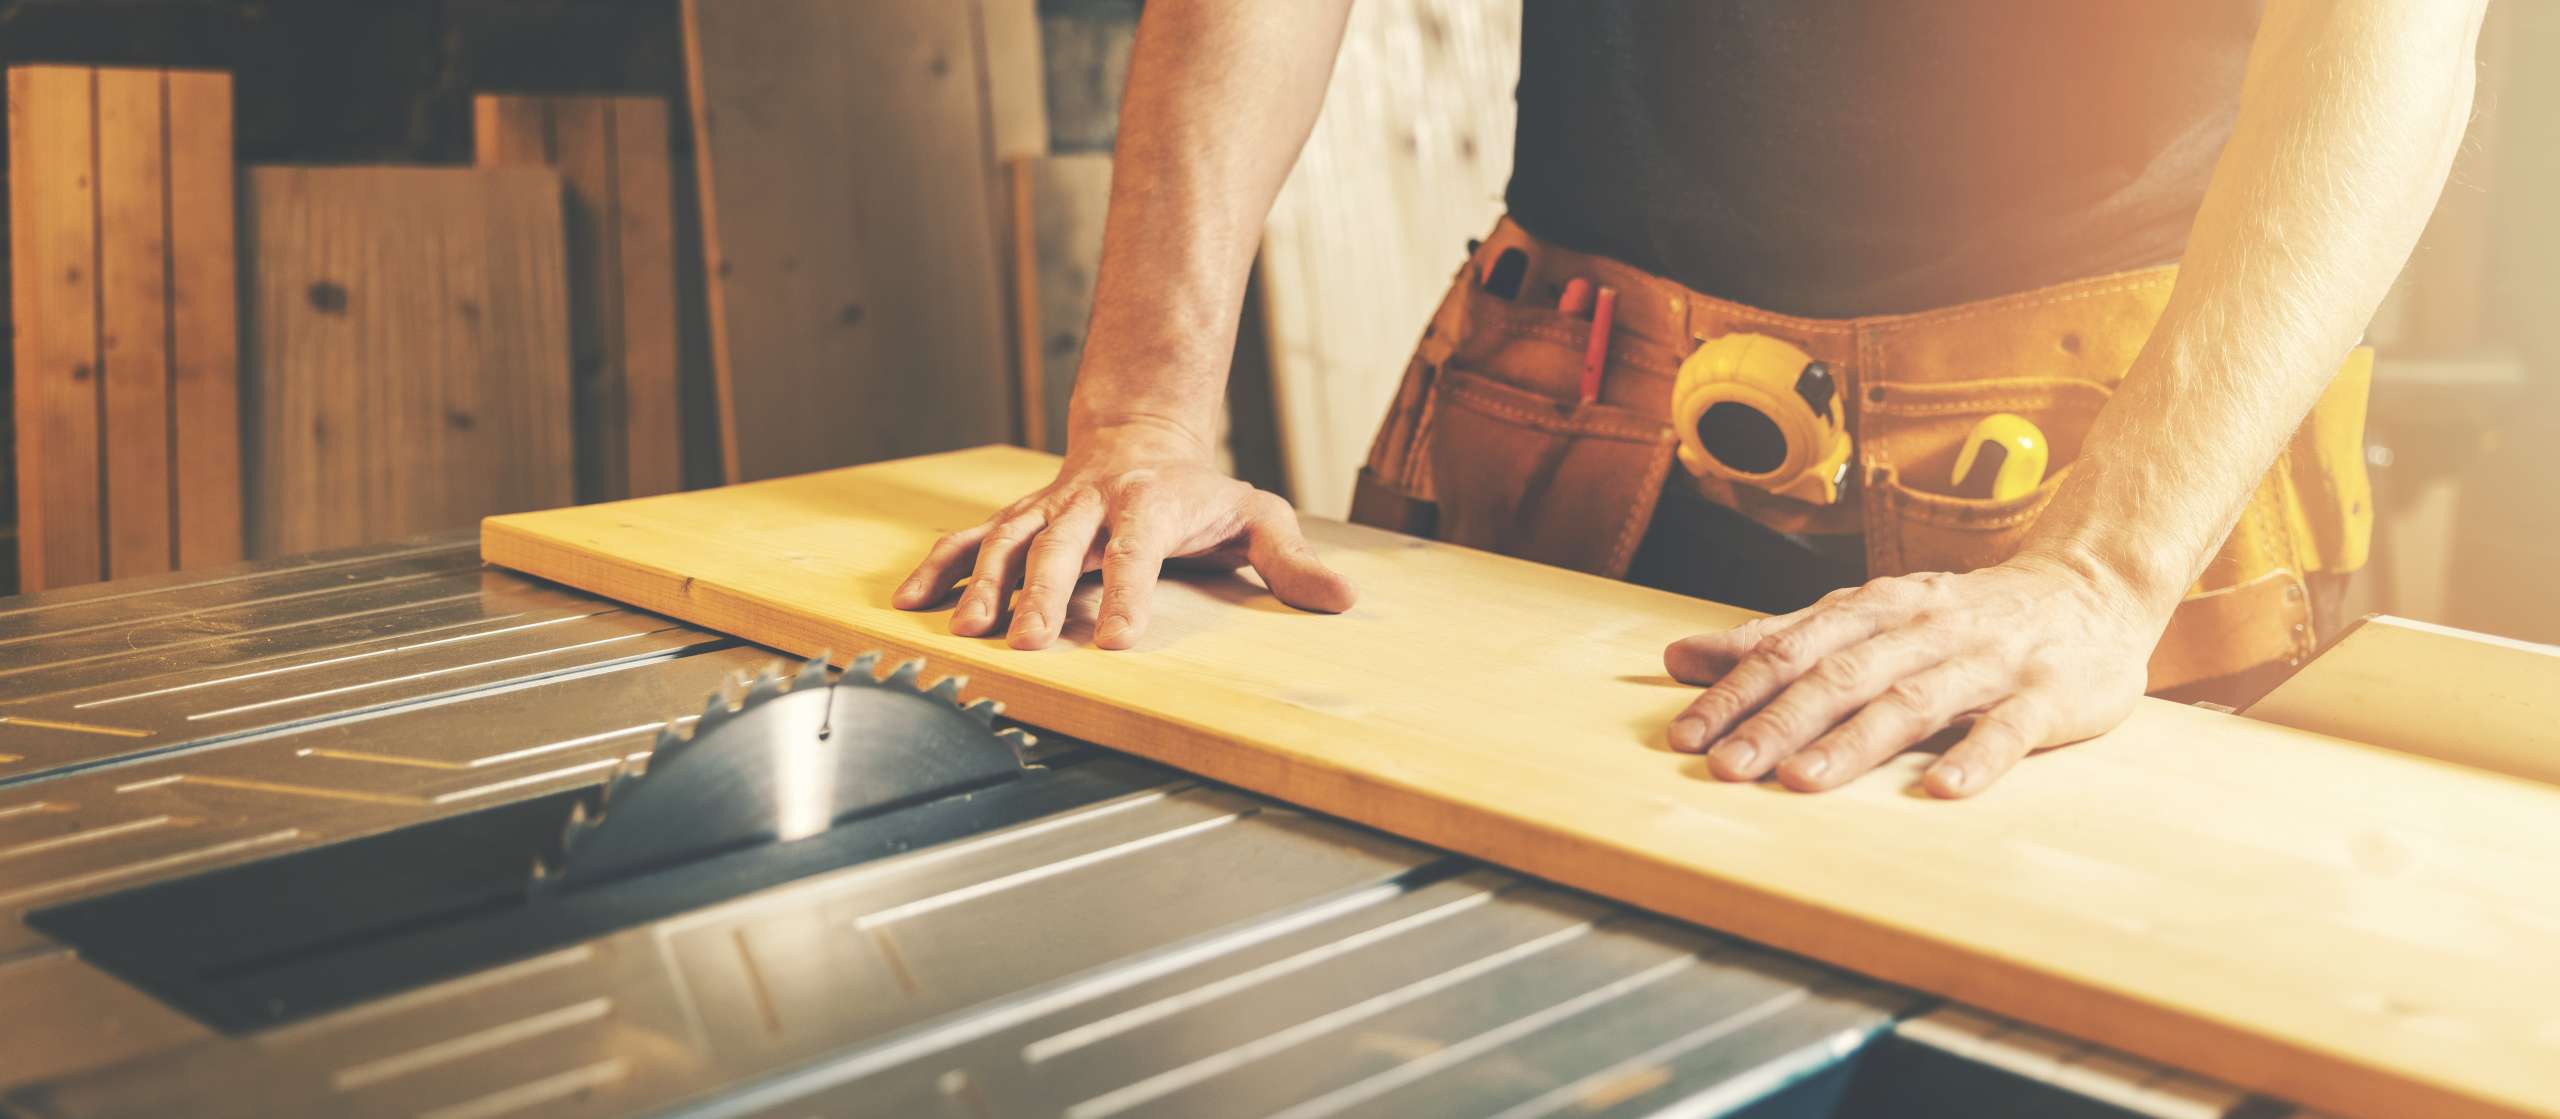 A carpenter cuts wooden board on a table saw.